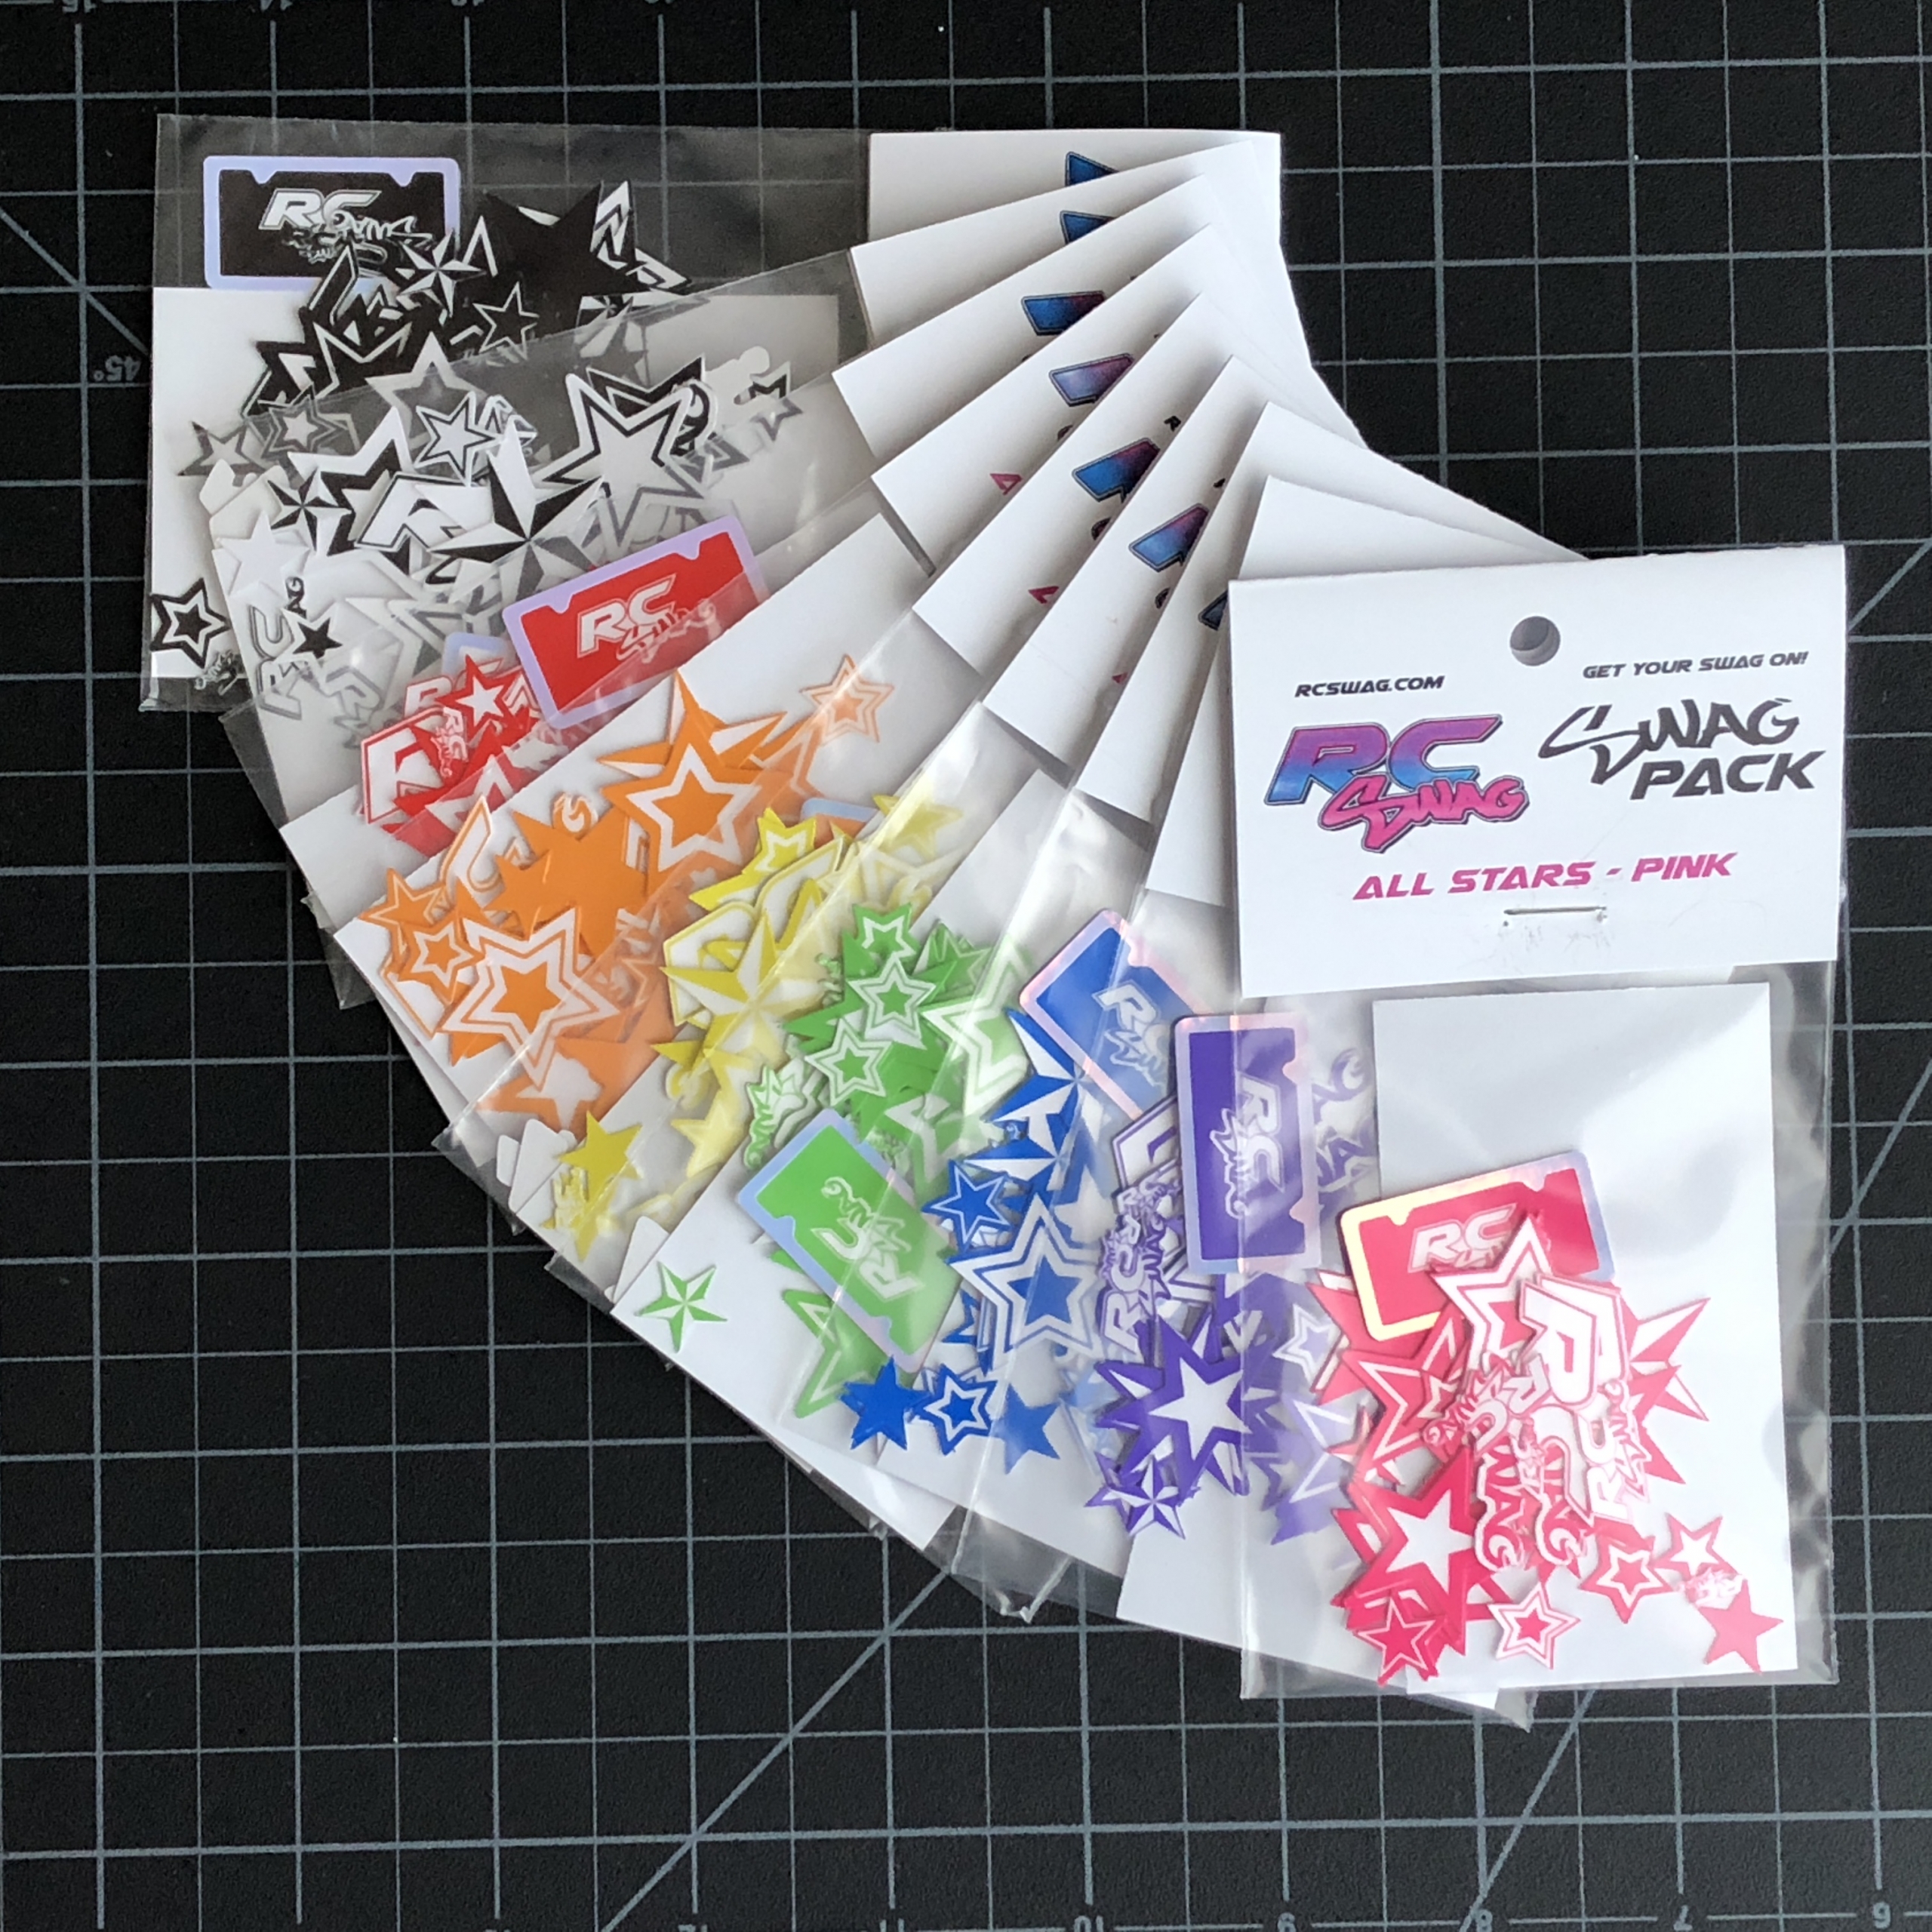 ALL Stars Sticker SWAG Packs by RC SWAG Custom Stickers - Available in Black, White, Red, Orange, Yellow, Green, Blue, Purple & Pink! Get Your SWAG On!